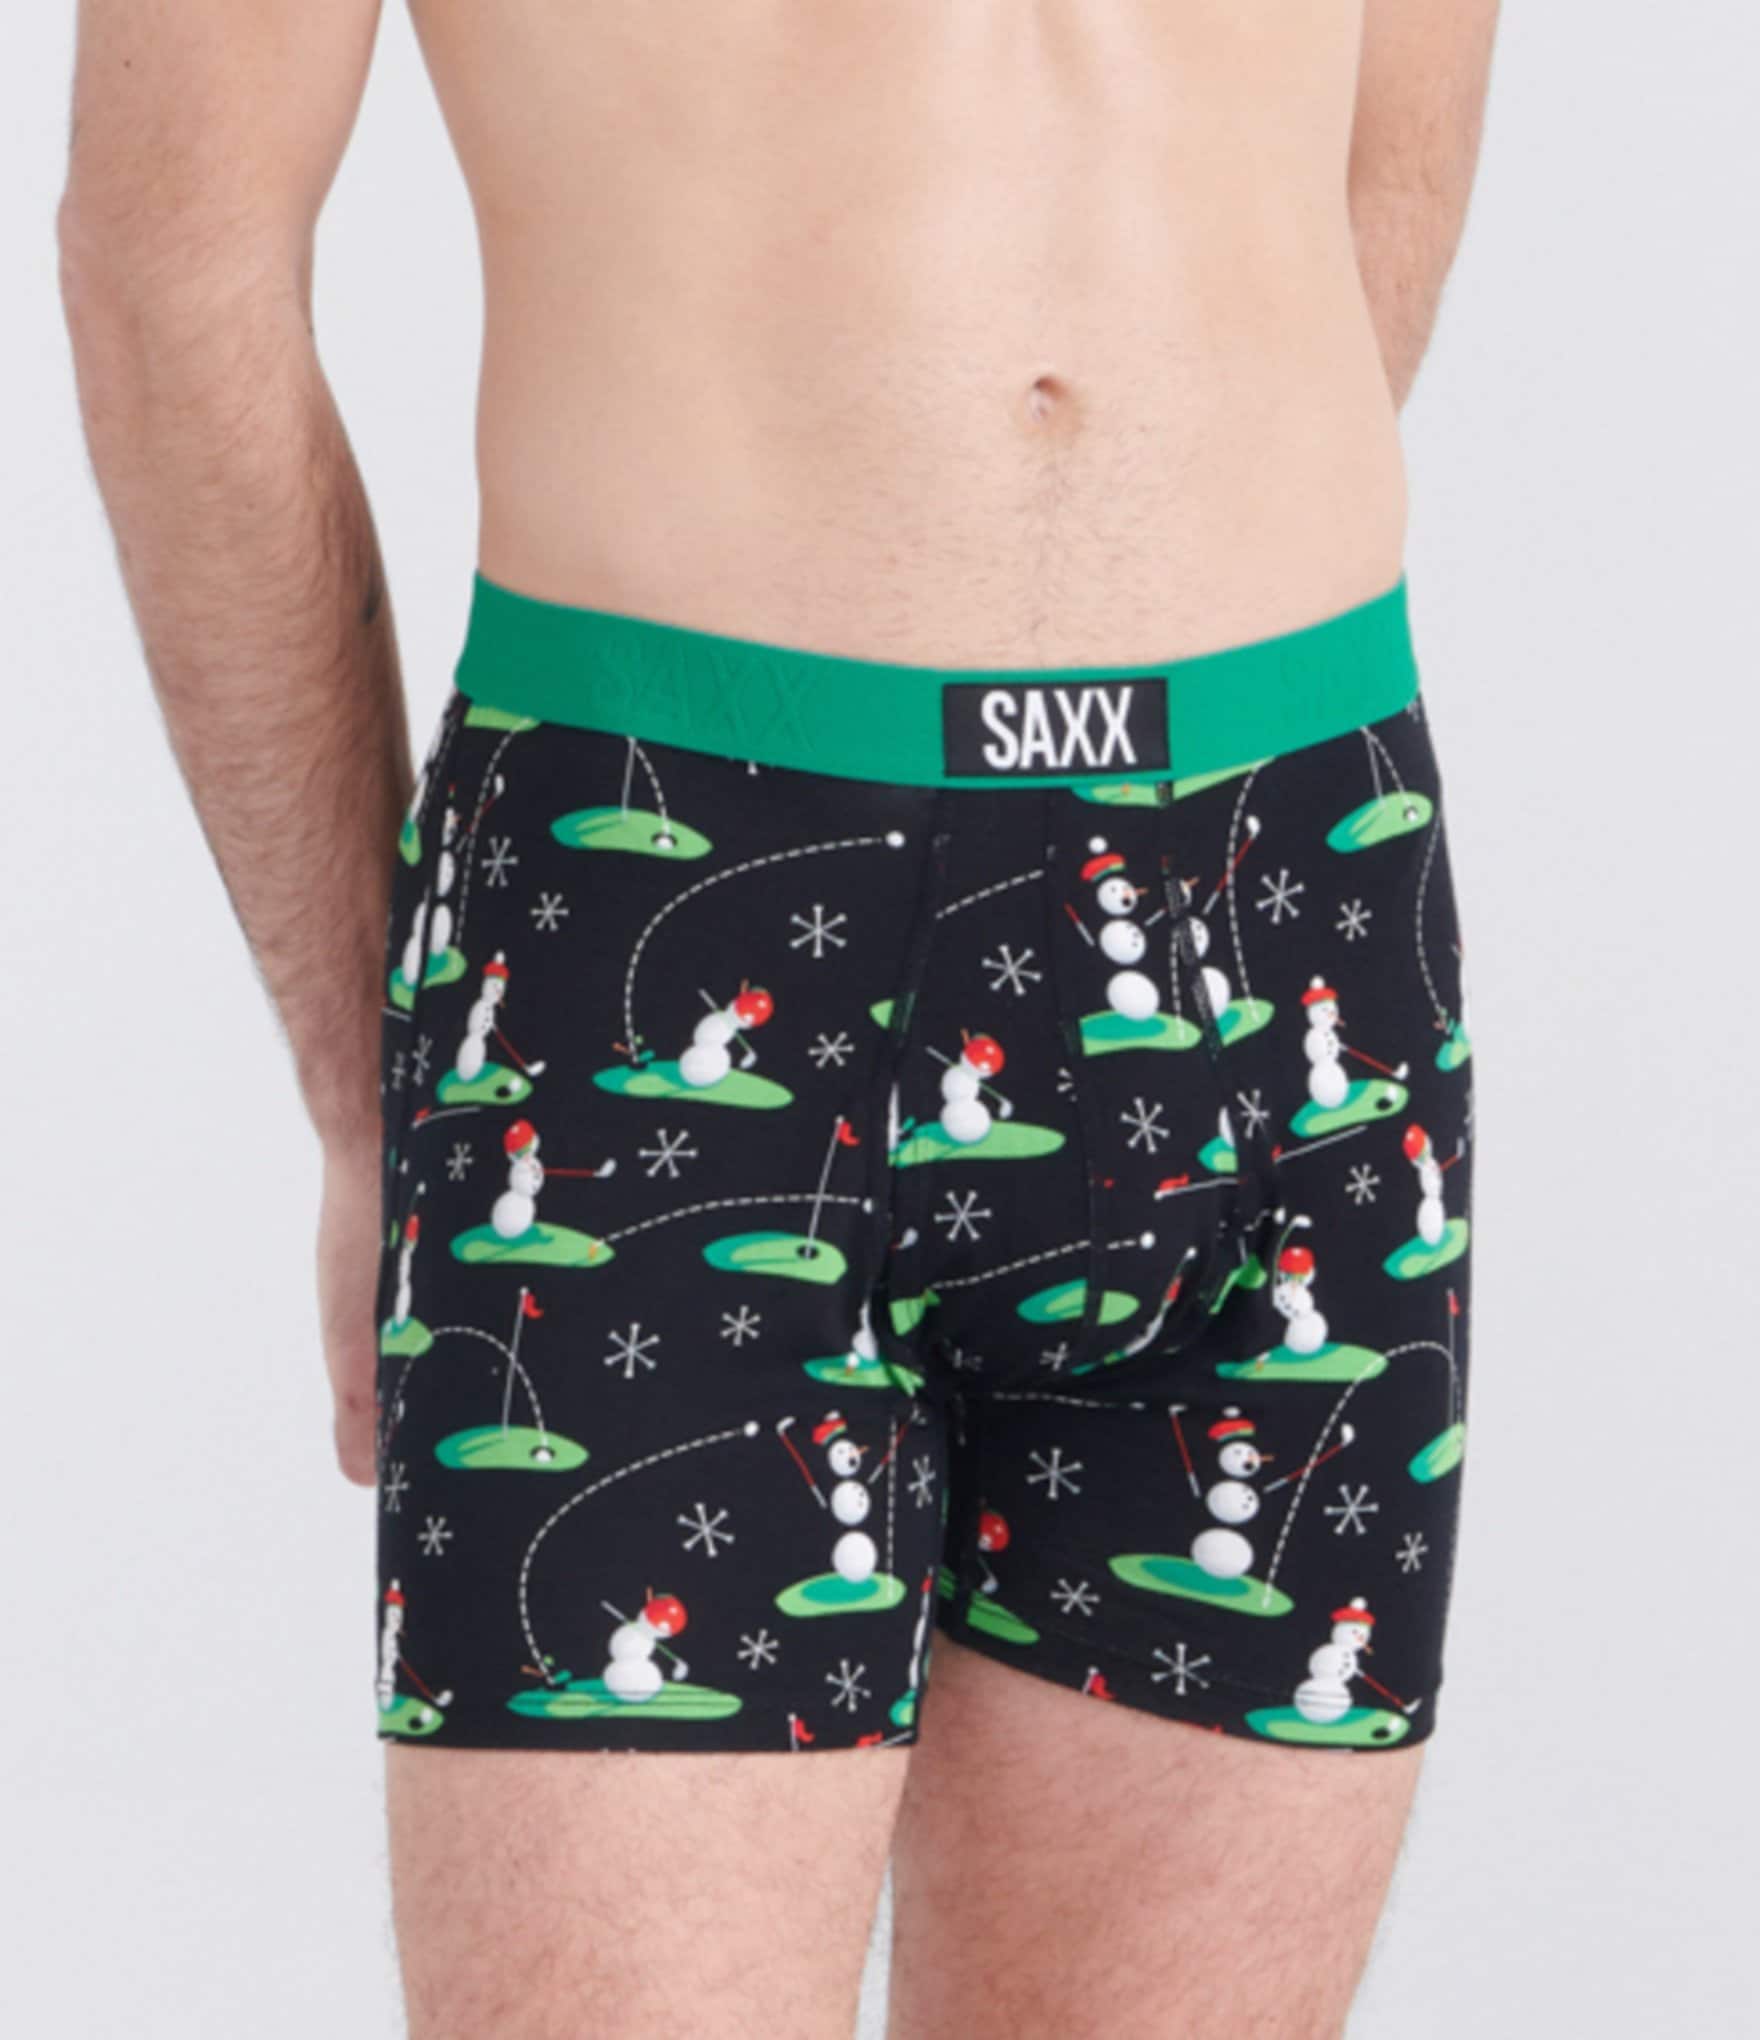 SAXX Rugby Stripe/Solid Boxer Brief 2-Pack